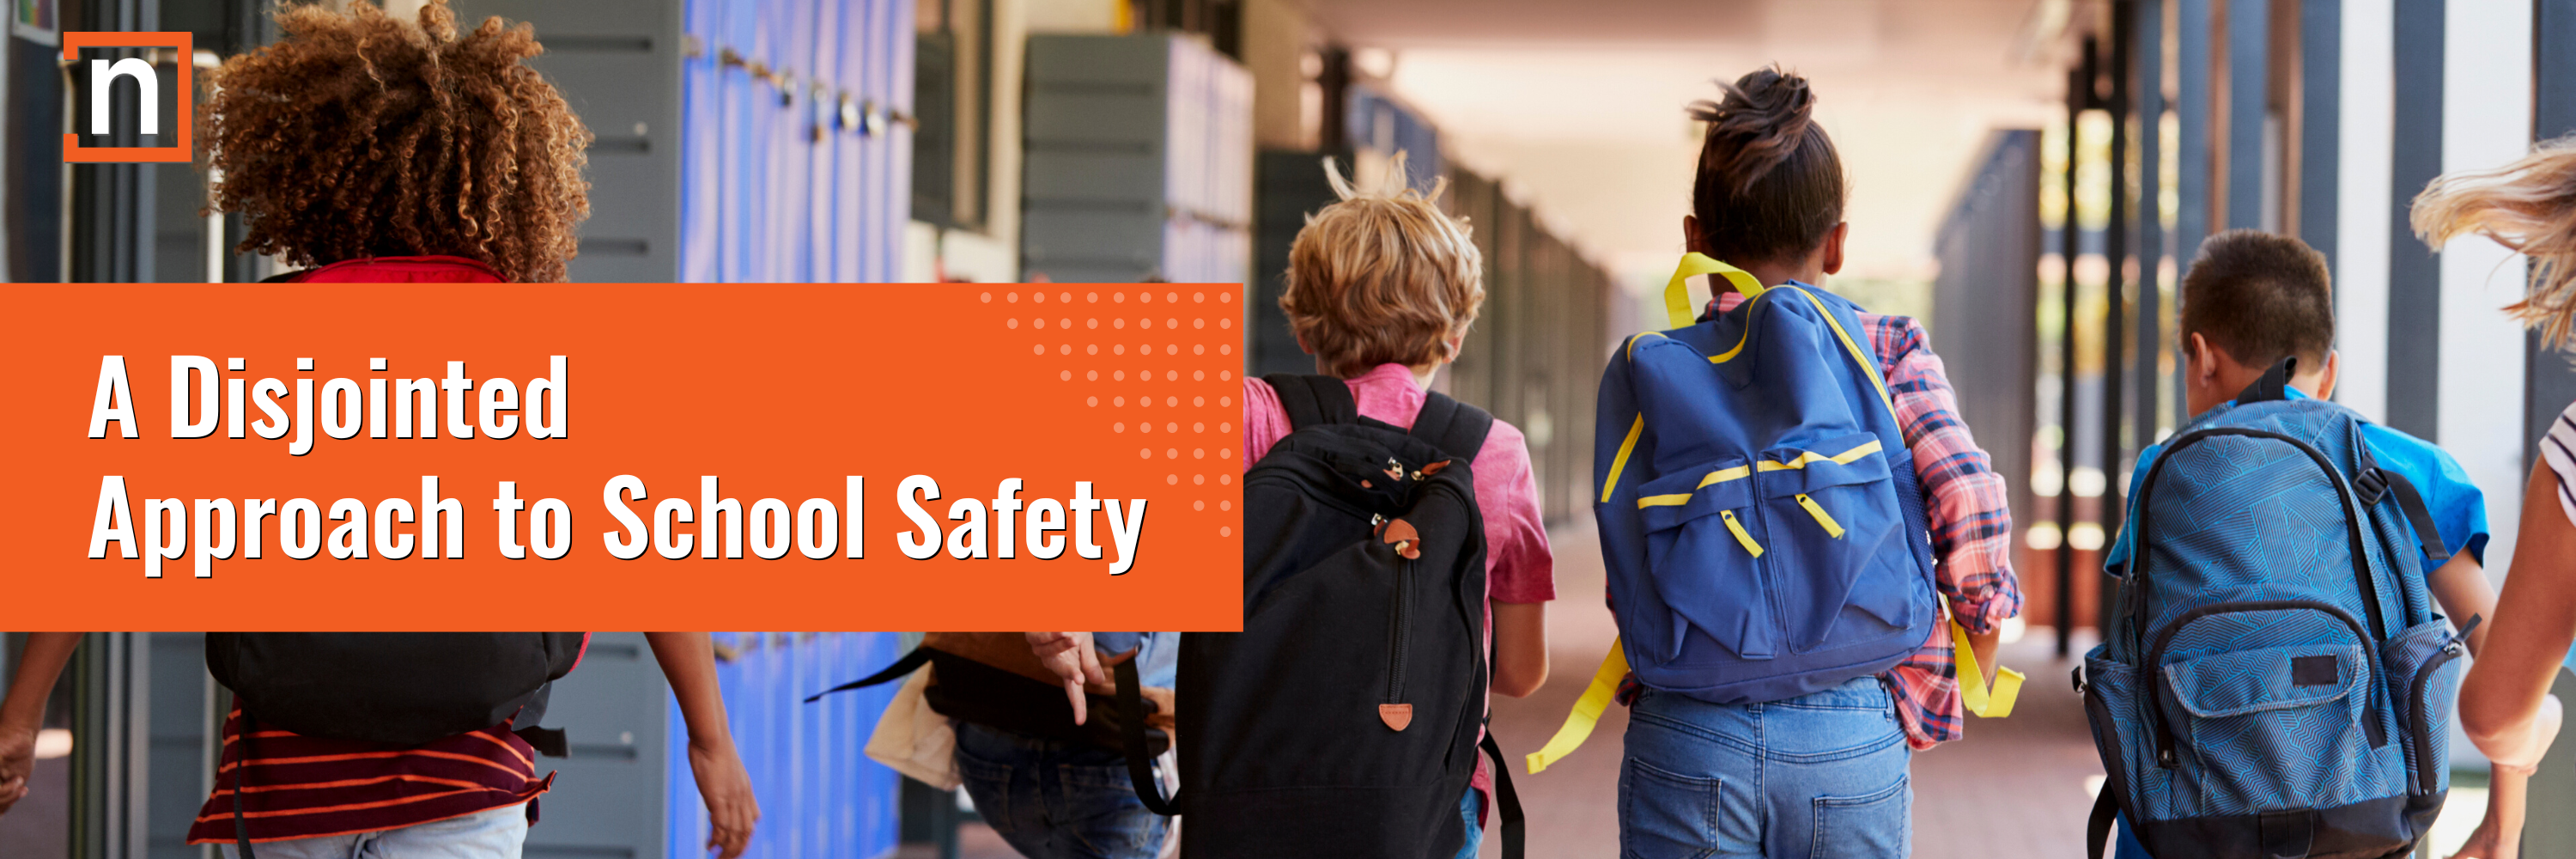 Blog Banner A Disjointed Approach to School Safety